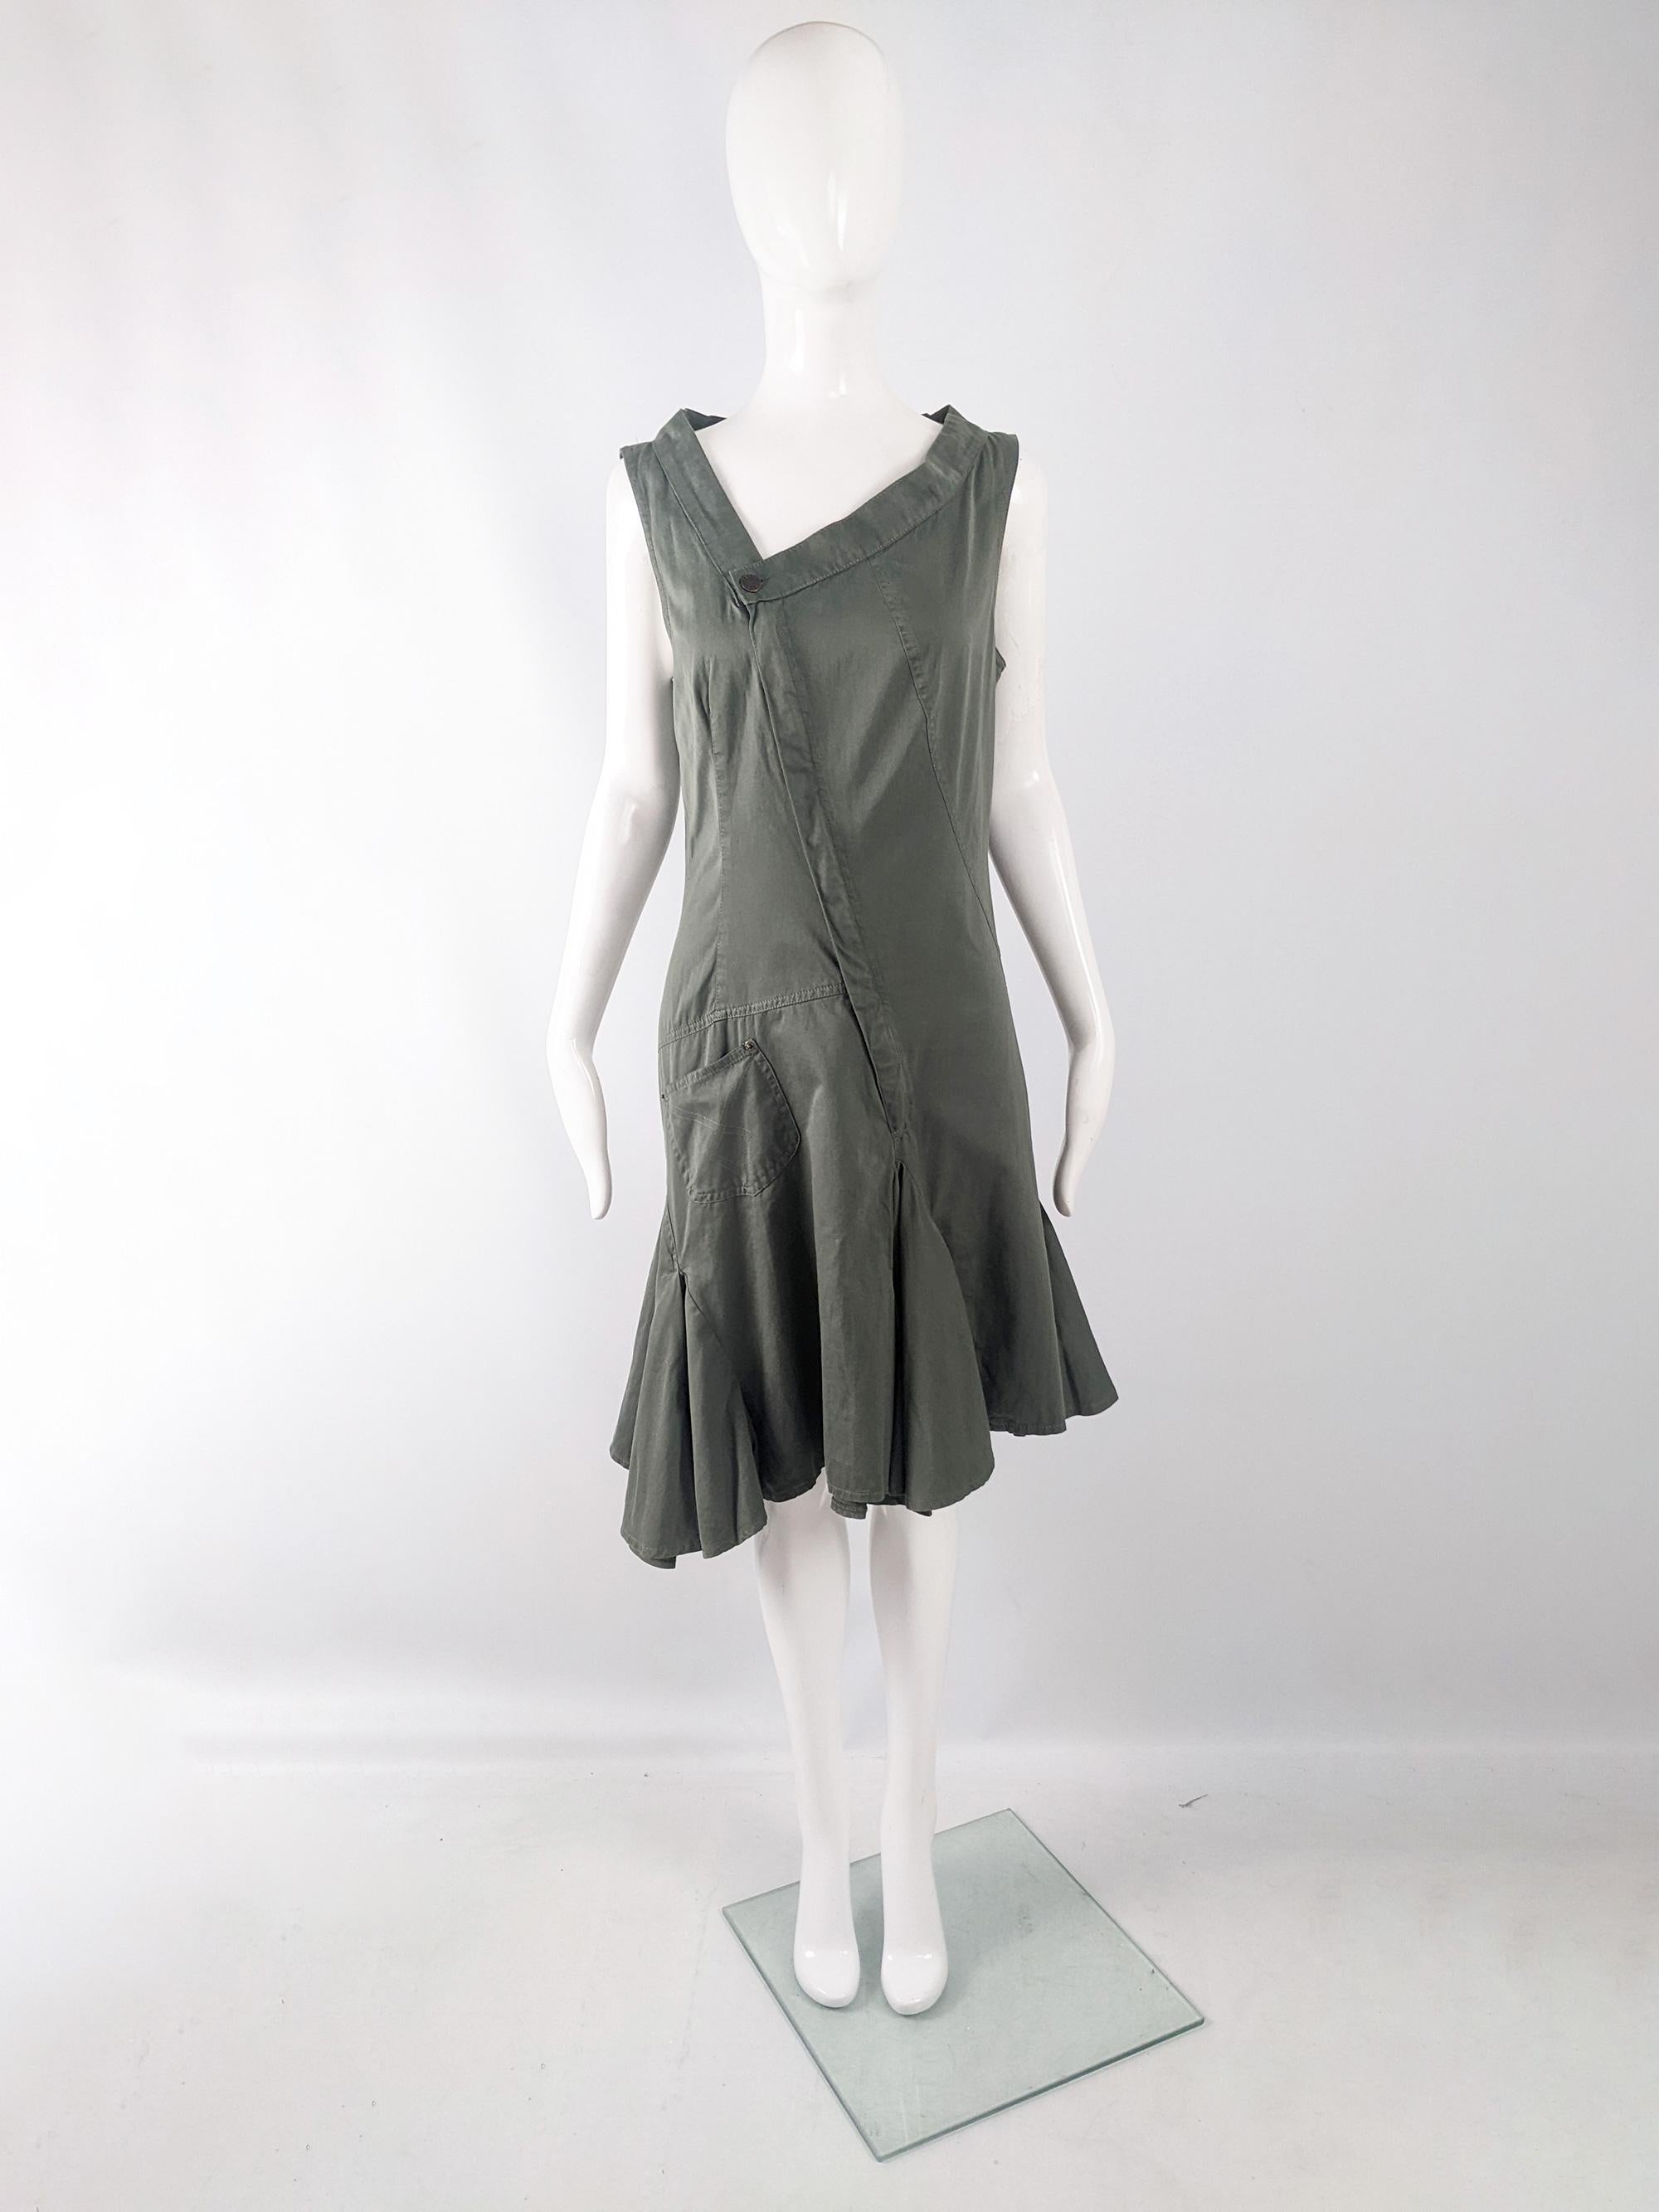 An amazing and avant garde vintage womens dress from the 90s by luxury fashion house Plein Sud for the Plein Sud Jeans line. In a green khaki cotton fabric with an asymmetrical look and a unique silhouette. It has a wide, off-centre neckline that